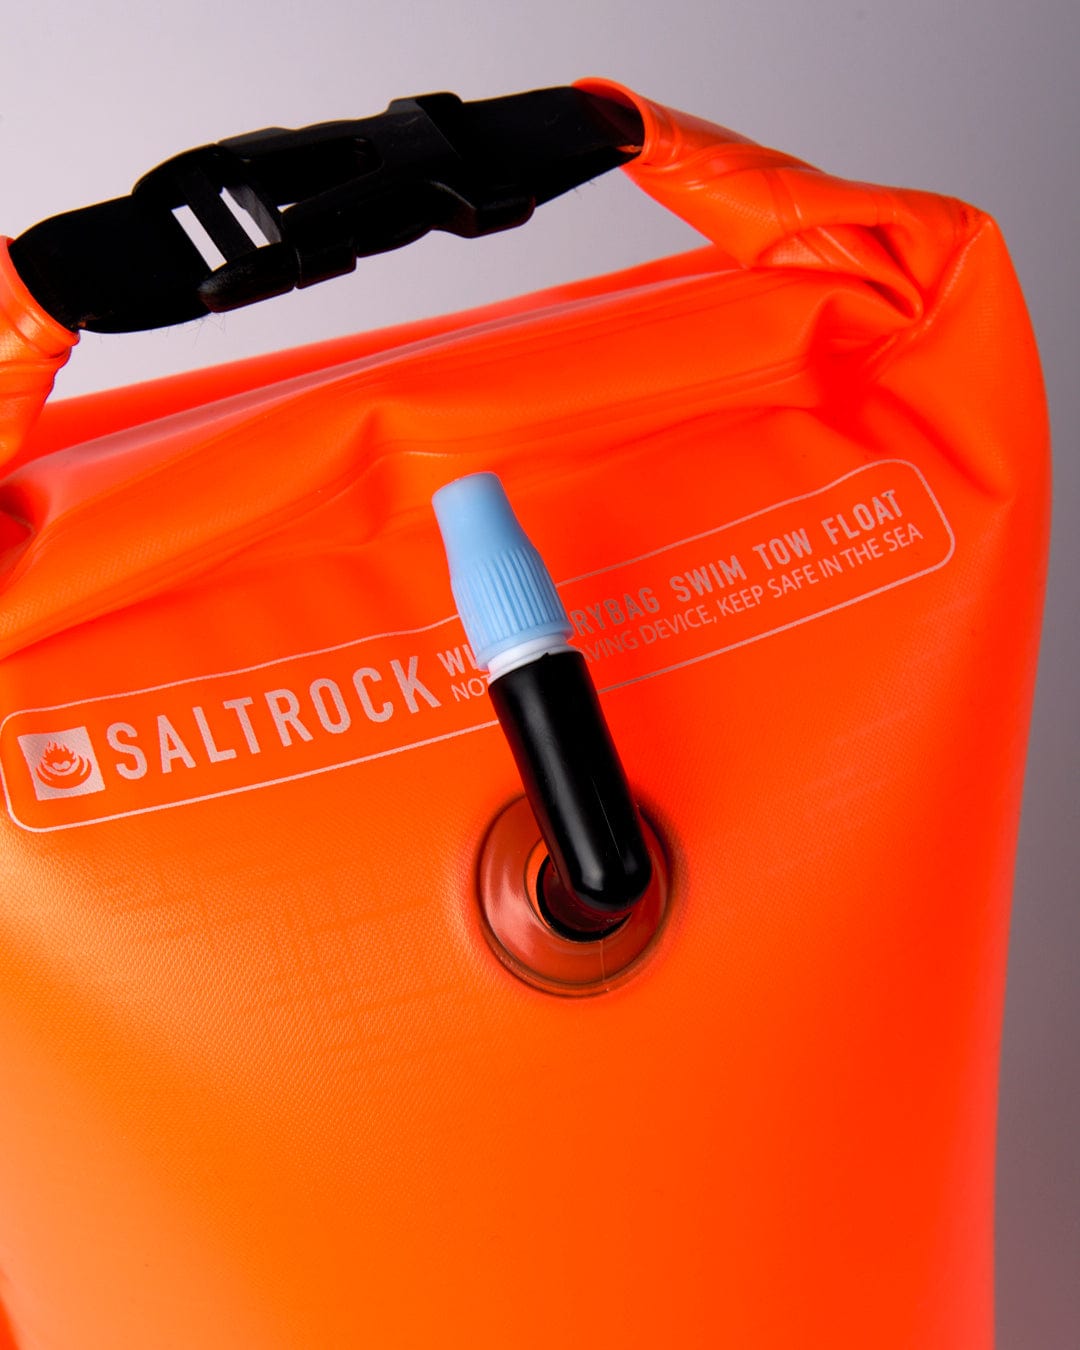 A close-up of a bright orange, waterproof Saltrock Wild Drybag/Inflatable Swim Tow Float with an inflation valve and clip visible, perfect for cold water swimming.